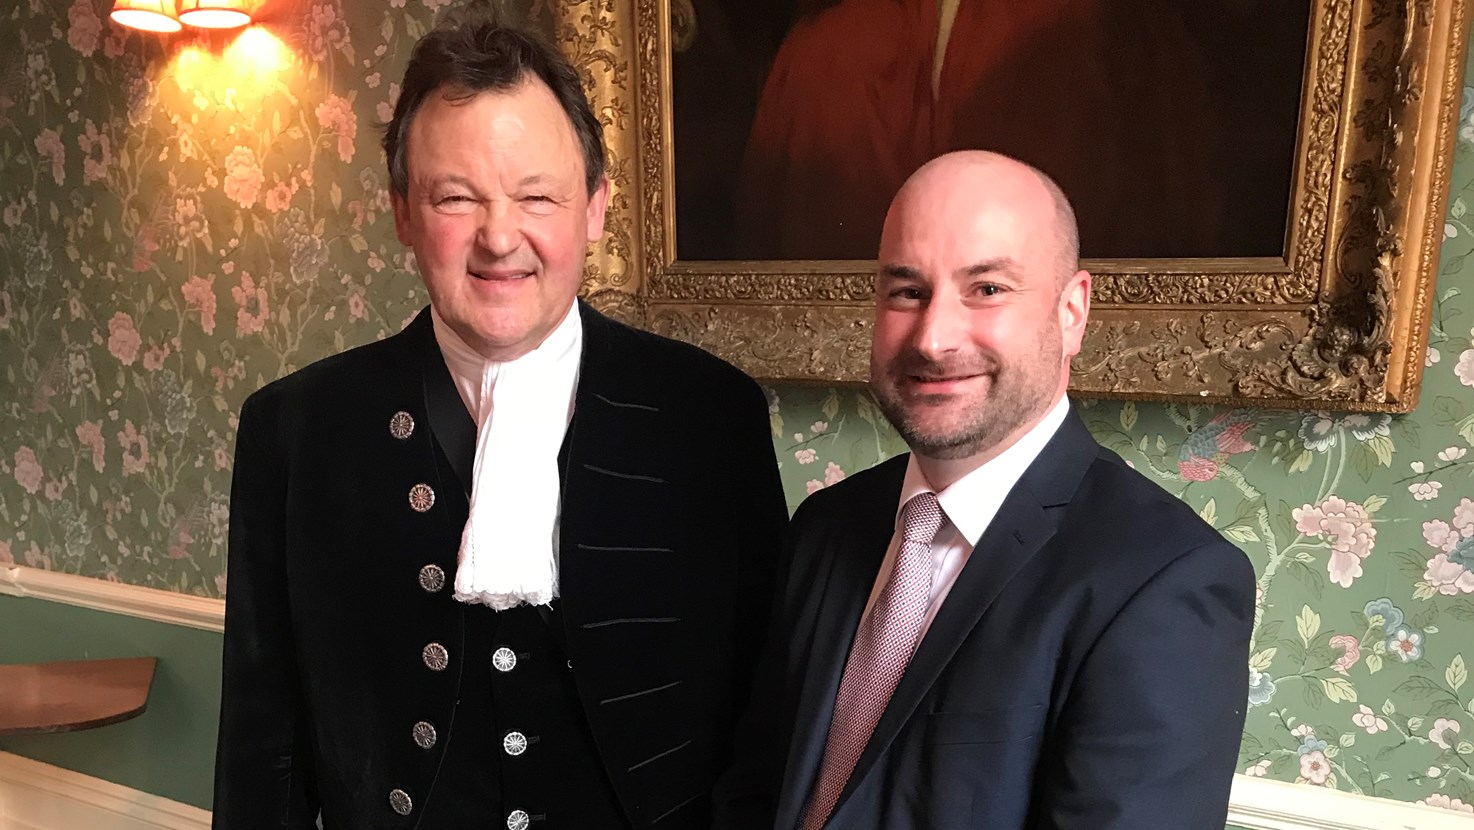 PCC Marc Jones pictured with the High Sheriff